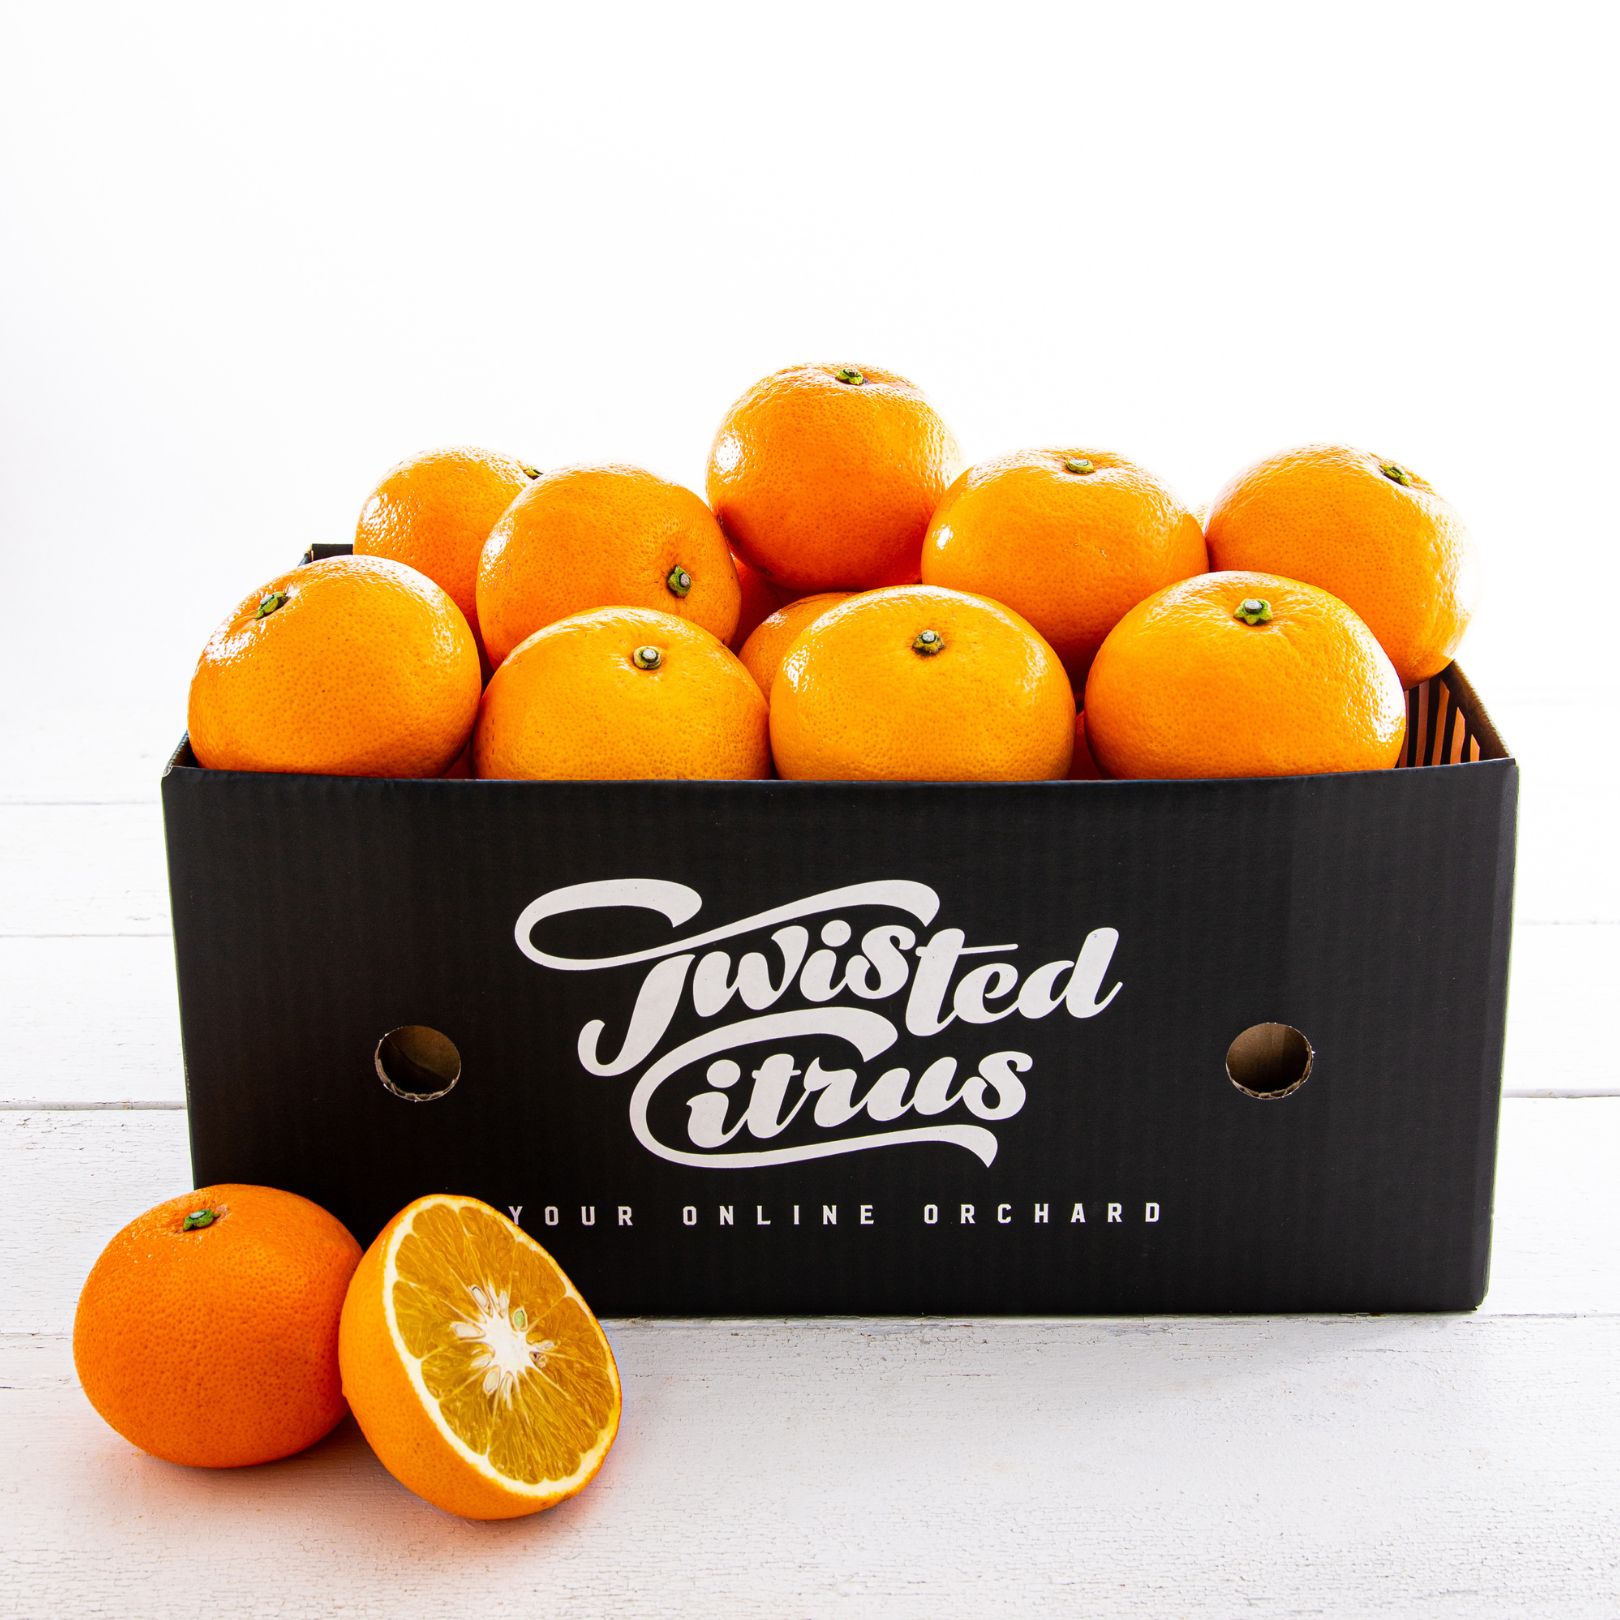 Buy Grapefruit - Cutlers Red Online NZ - Twisted Citrus